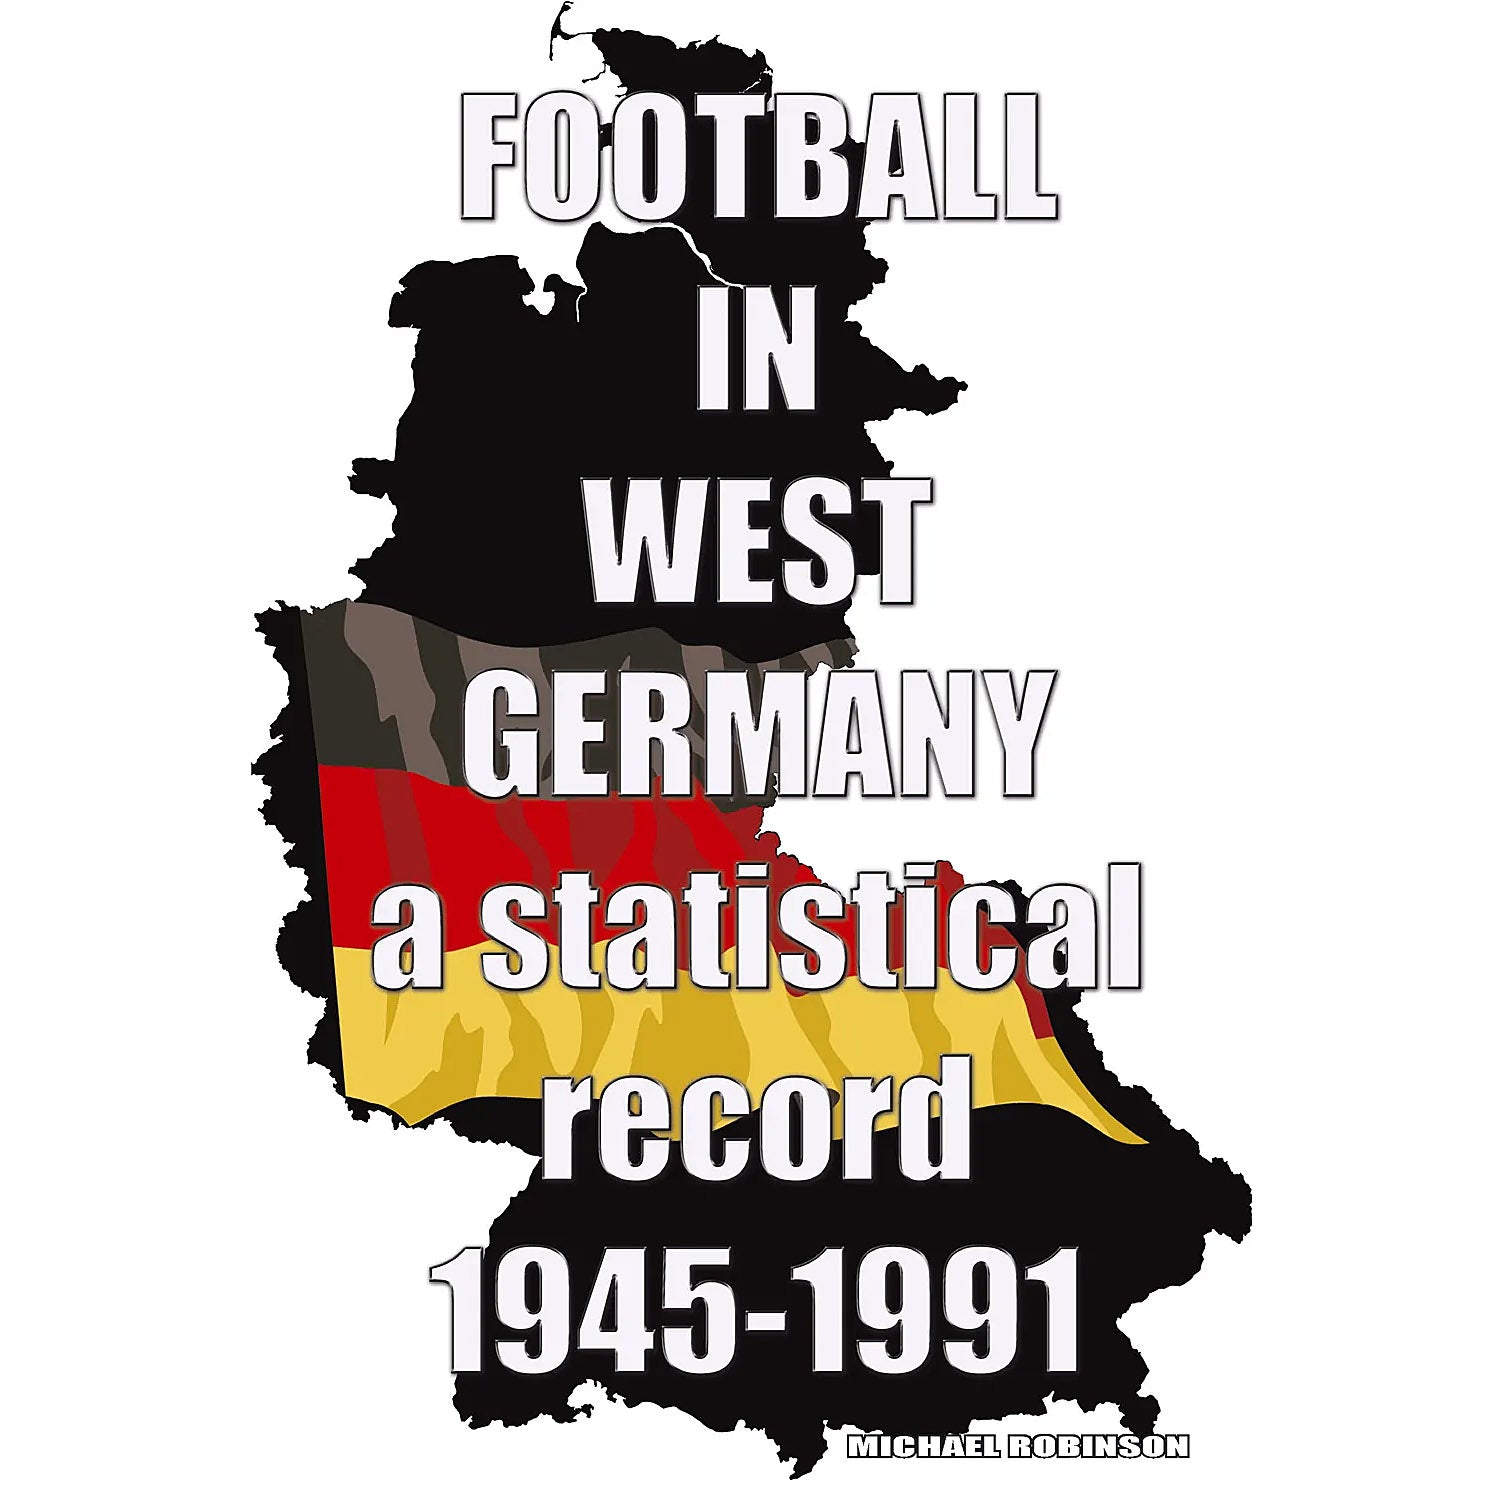 Football in West Germany – a statistical record 1945-1991